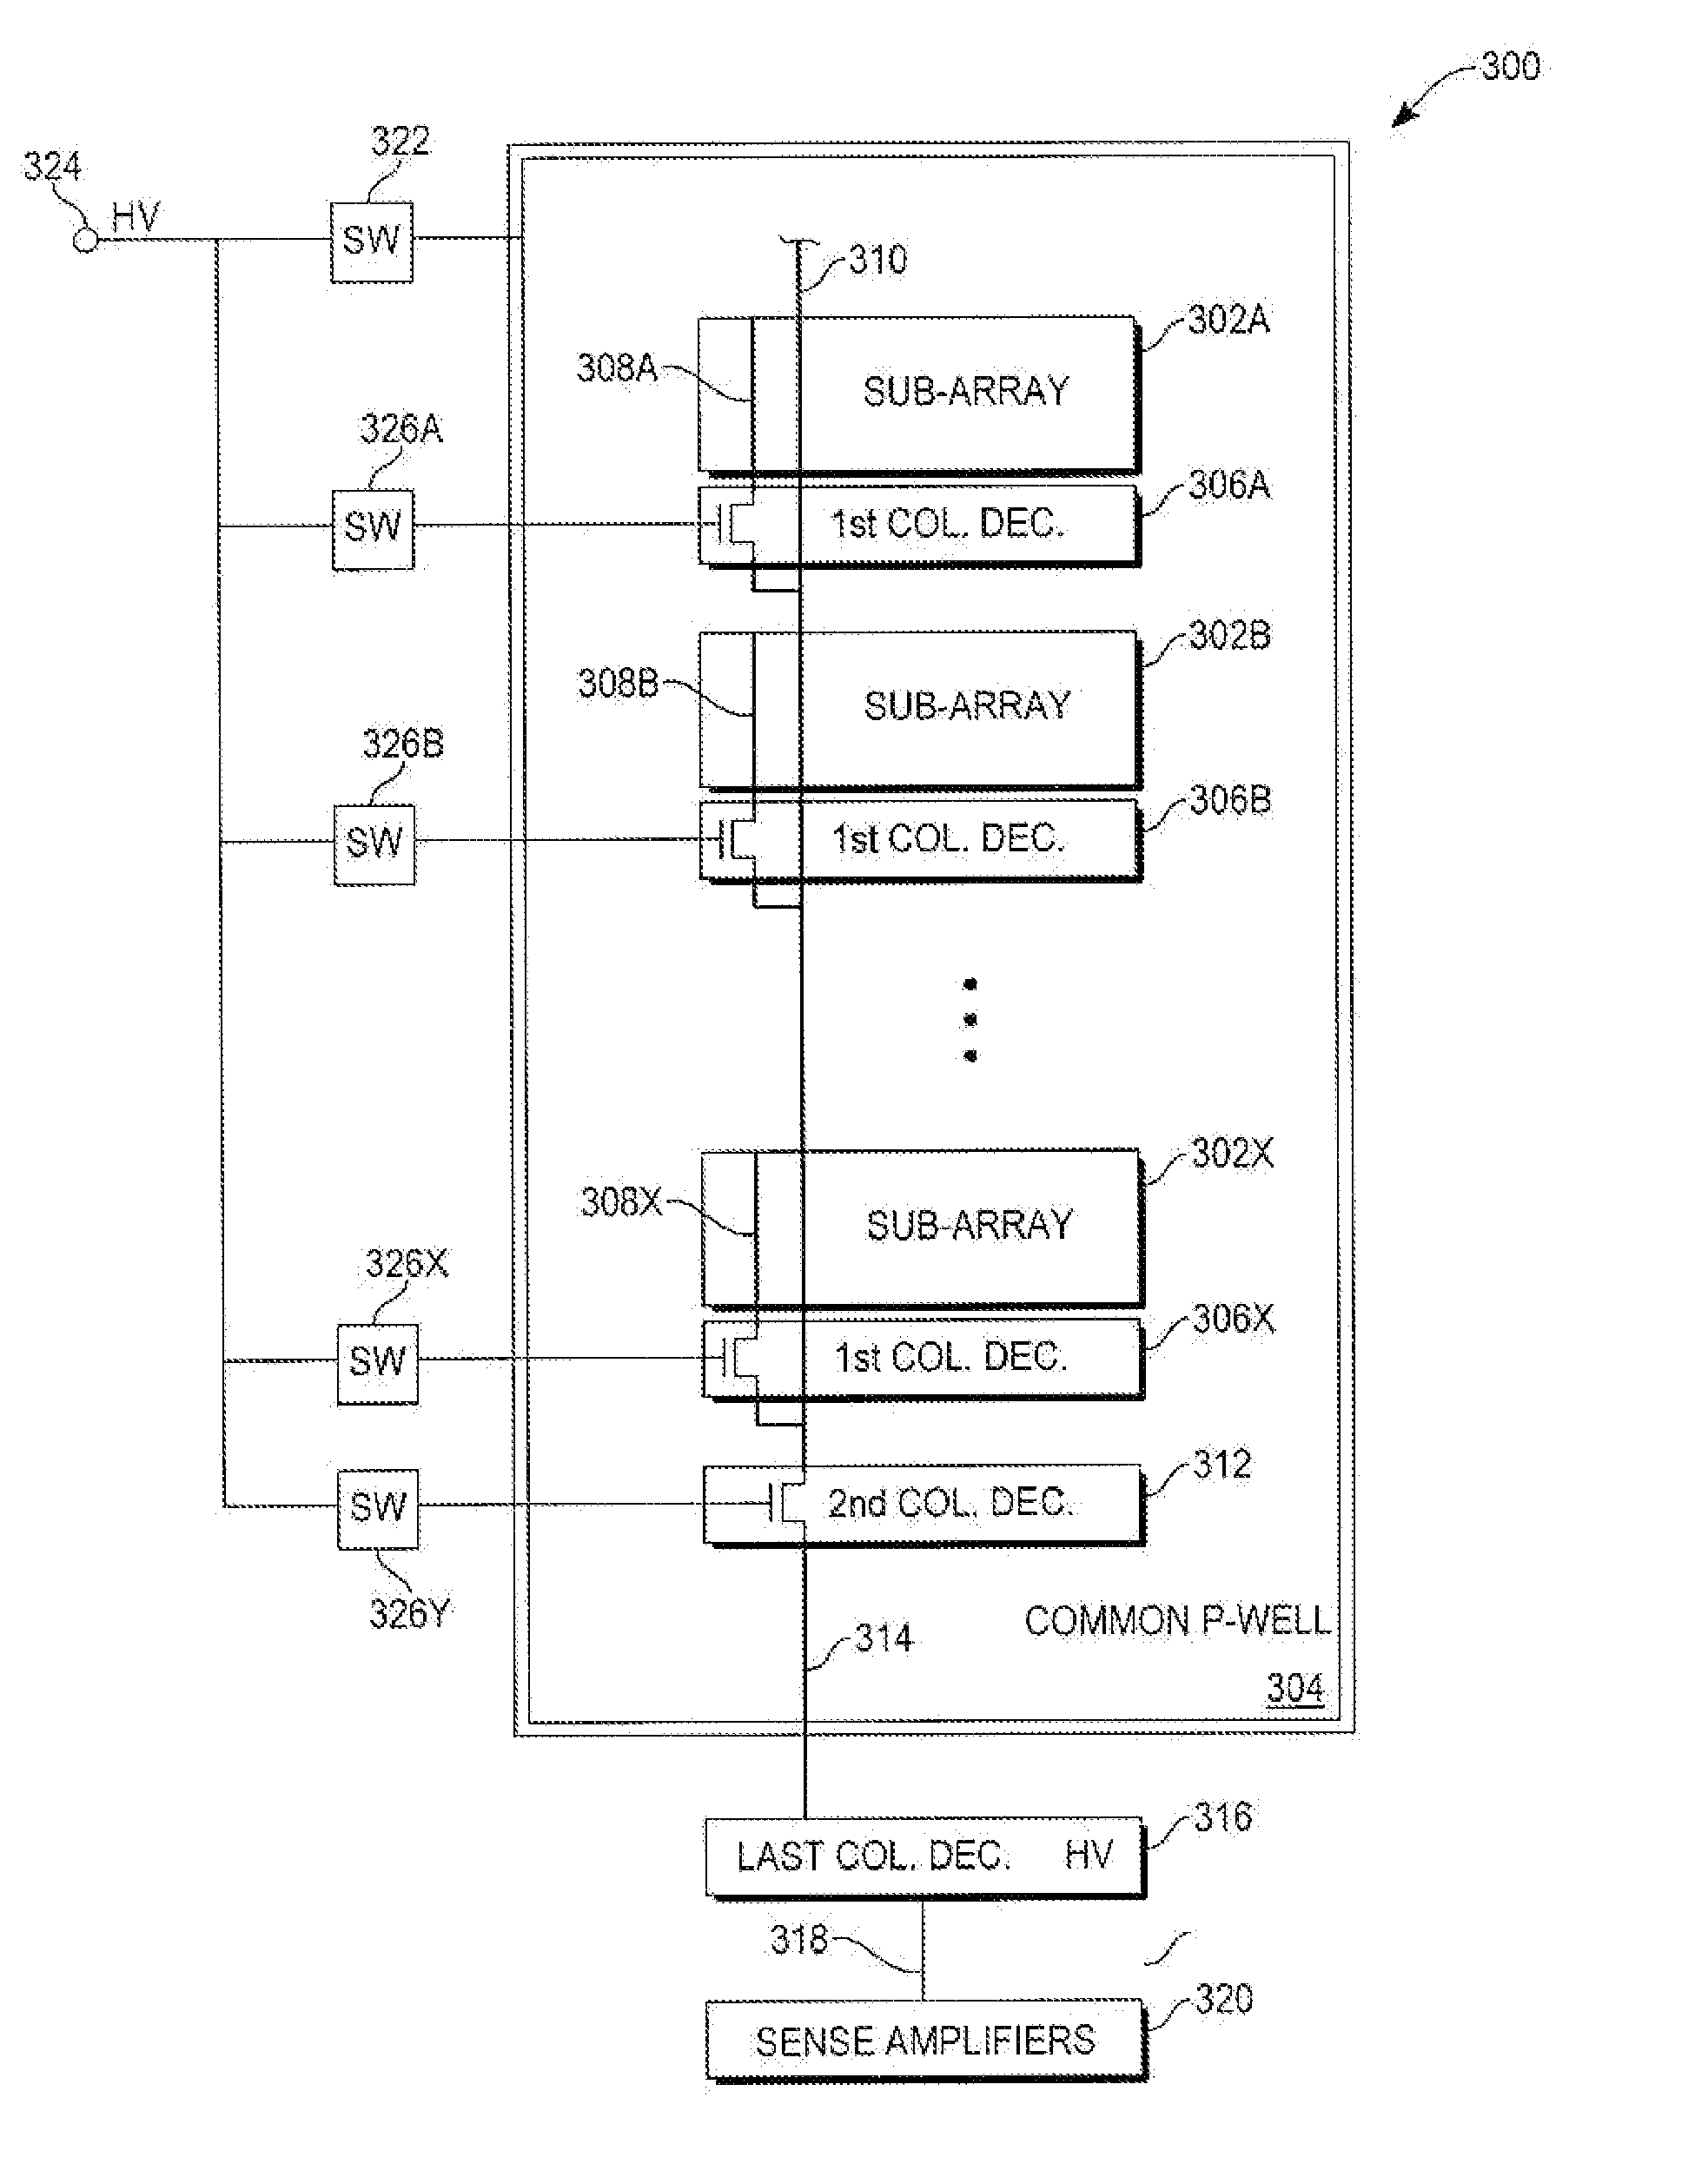 Low voltage column decoder sharing a memory array p-well